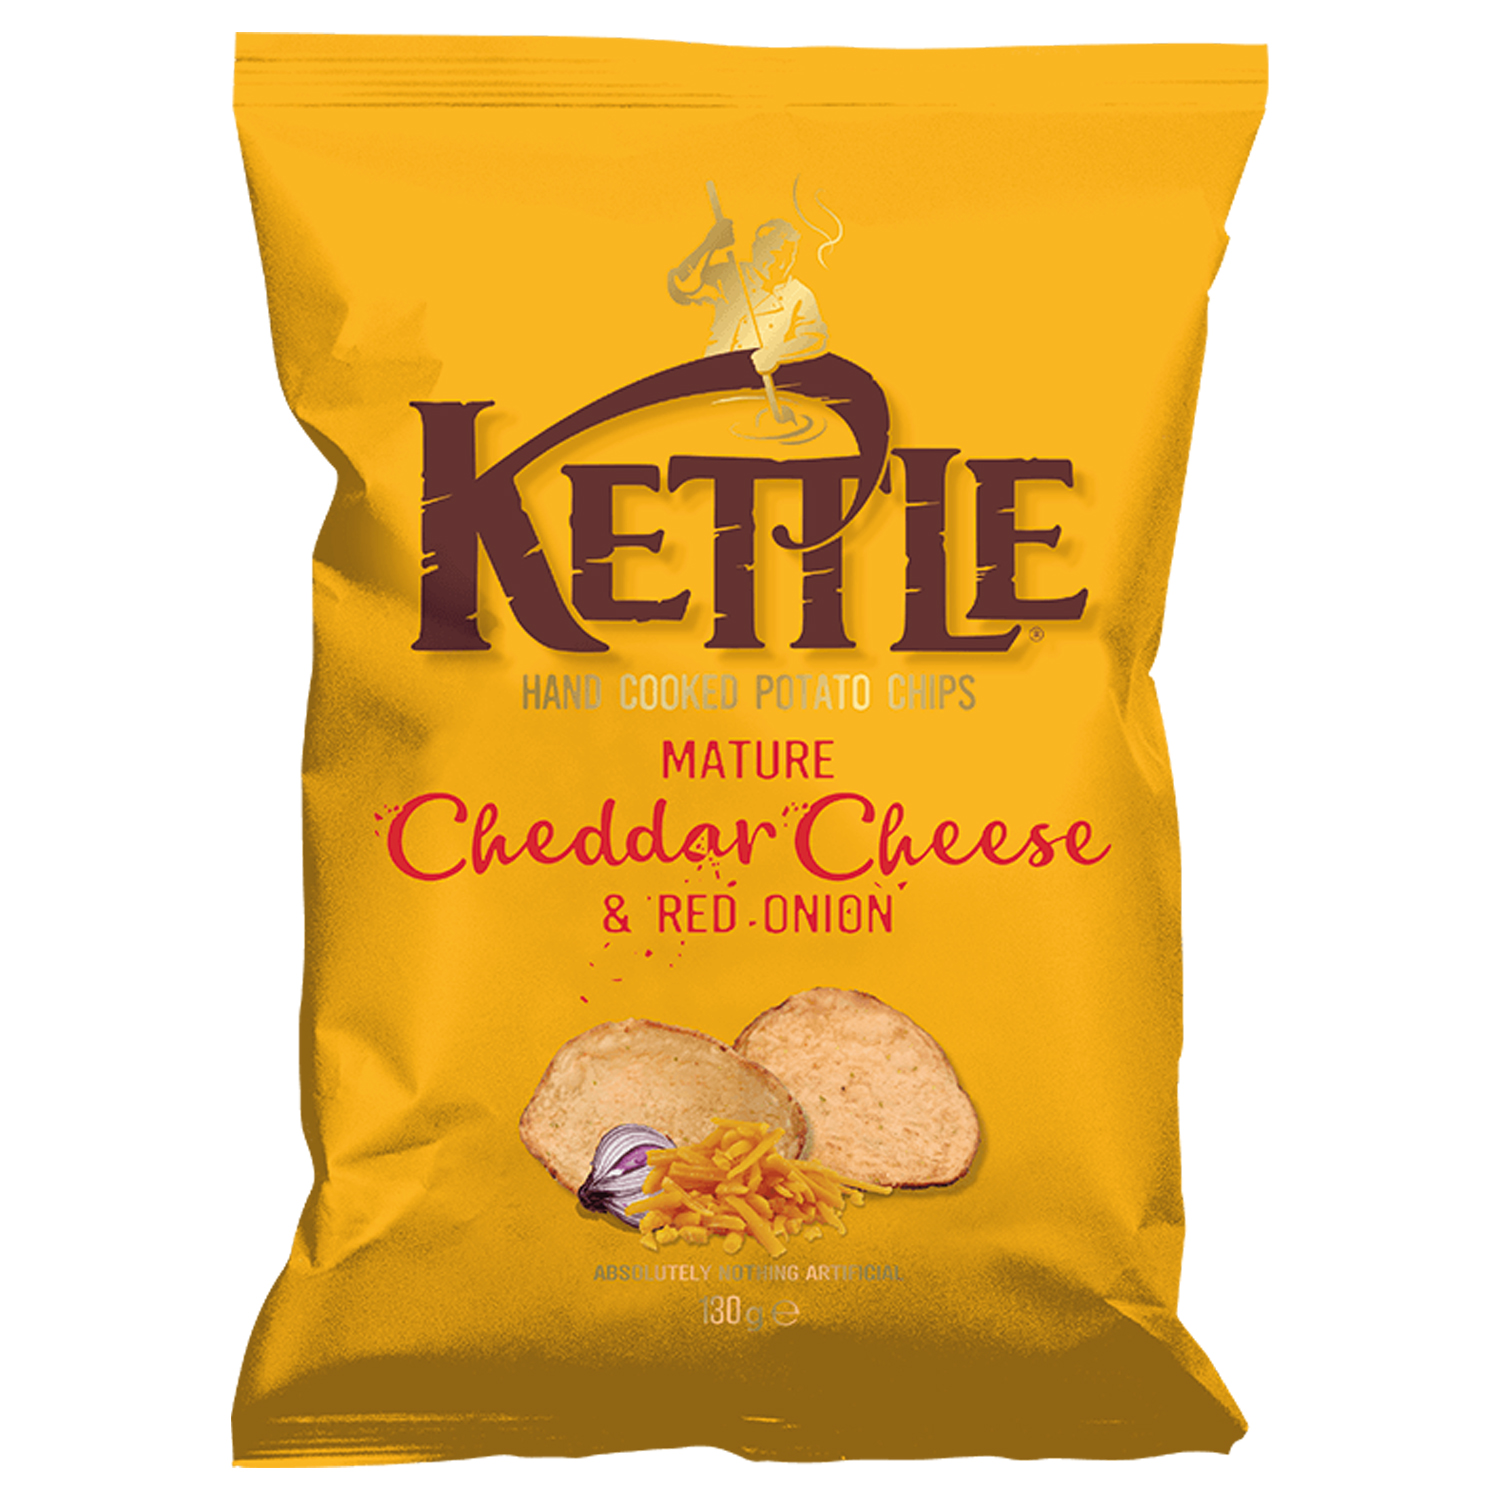 Kettle cheddar cheese and red onion chips – chips au cheddar et oignons rouges – 130g